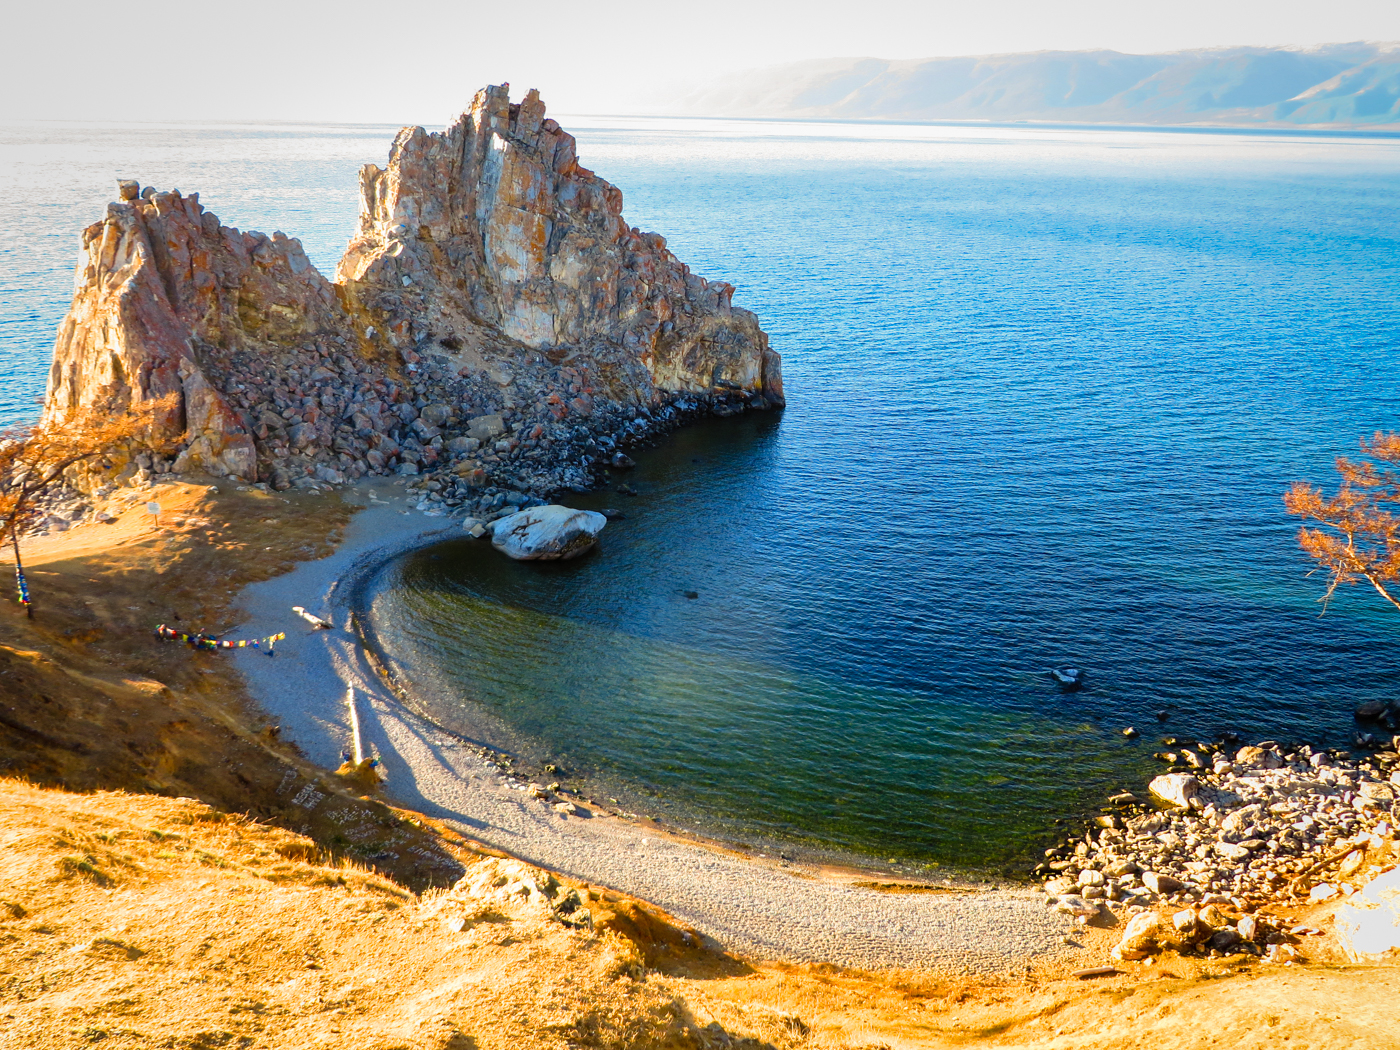 Olkhon Island in Lake Baikal, the deepest lake on earth and one of the curiosities about Russia